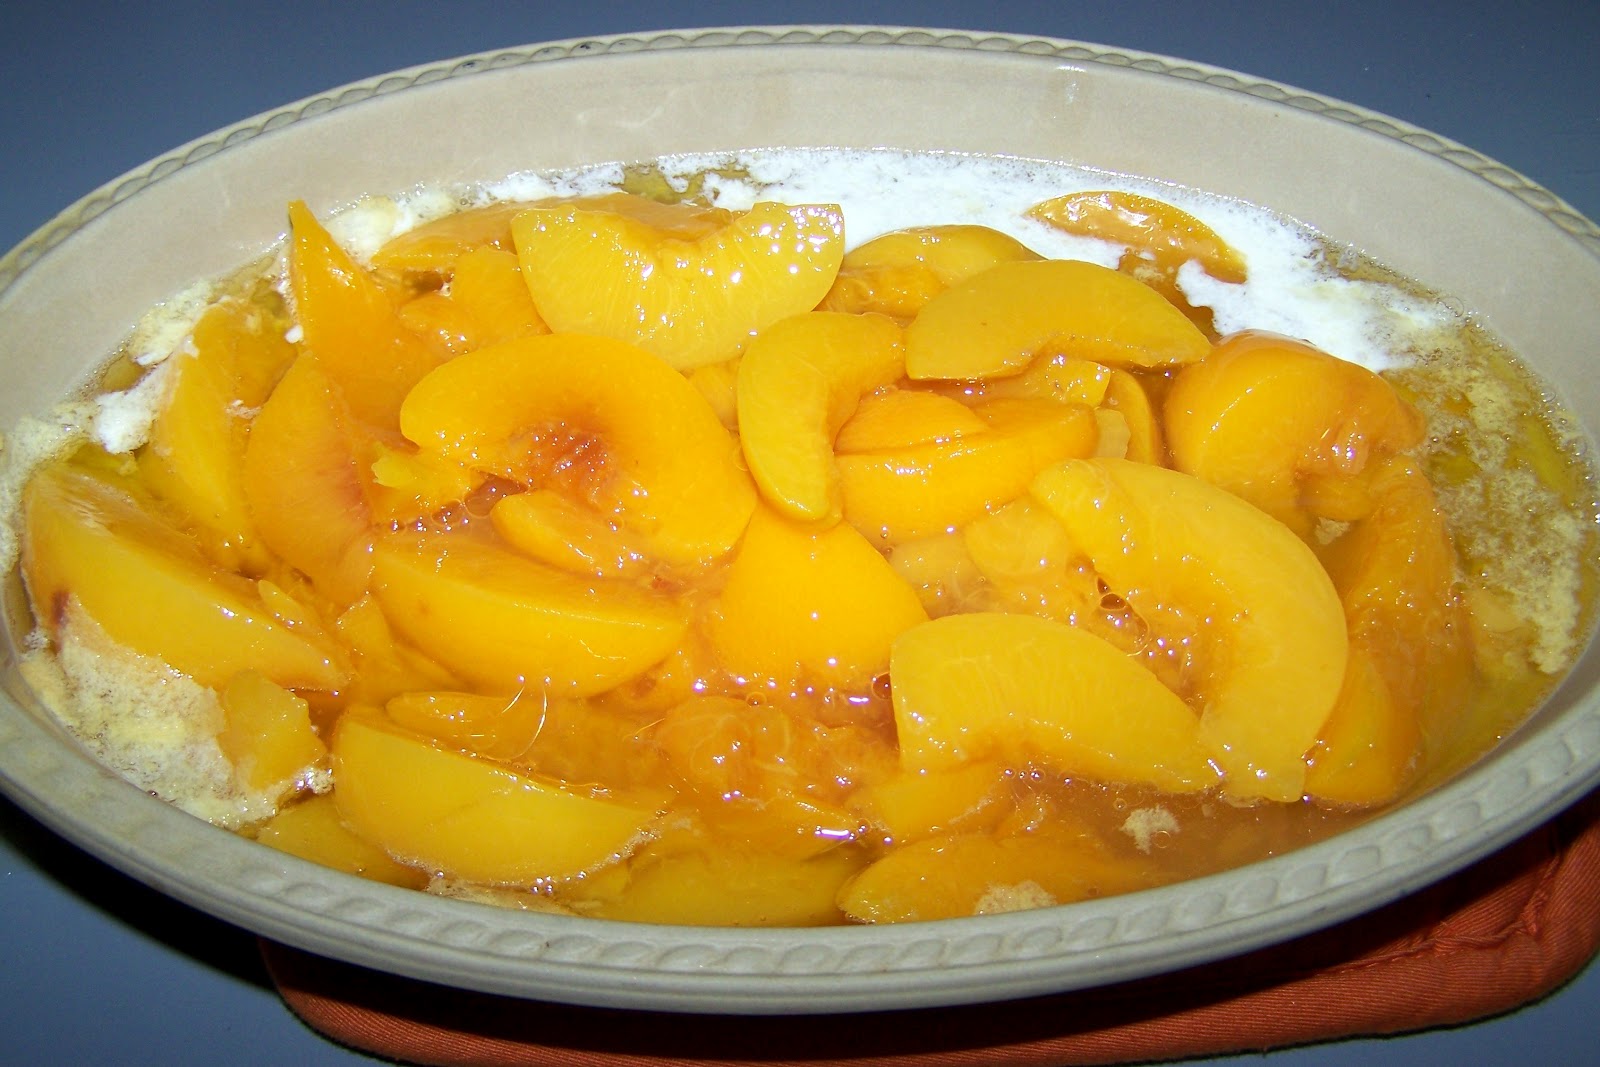 Man That Stuff Is Good!: Quick and Easy Peach Cobbler